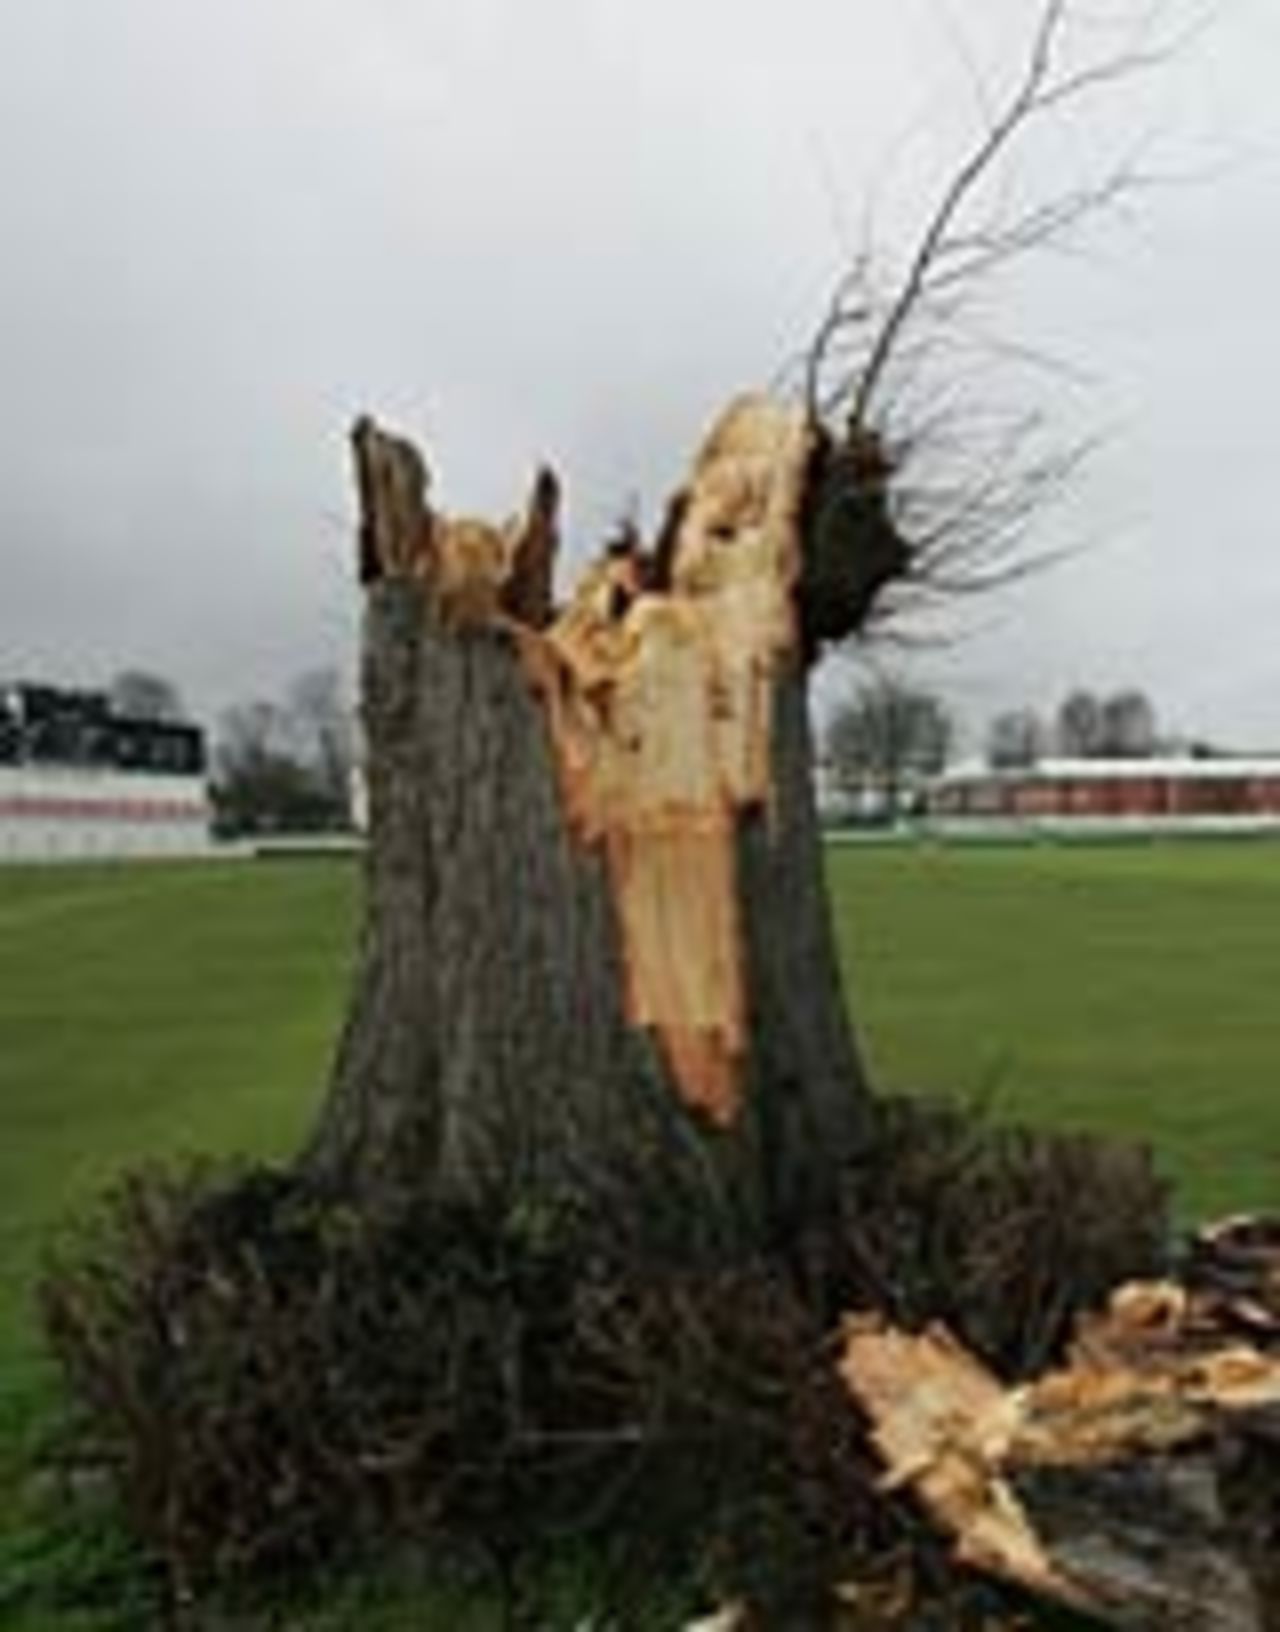 The stump of the lime tree at Canterbury, January 11, 2005